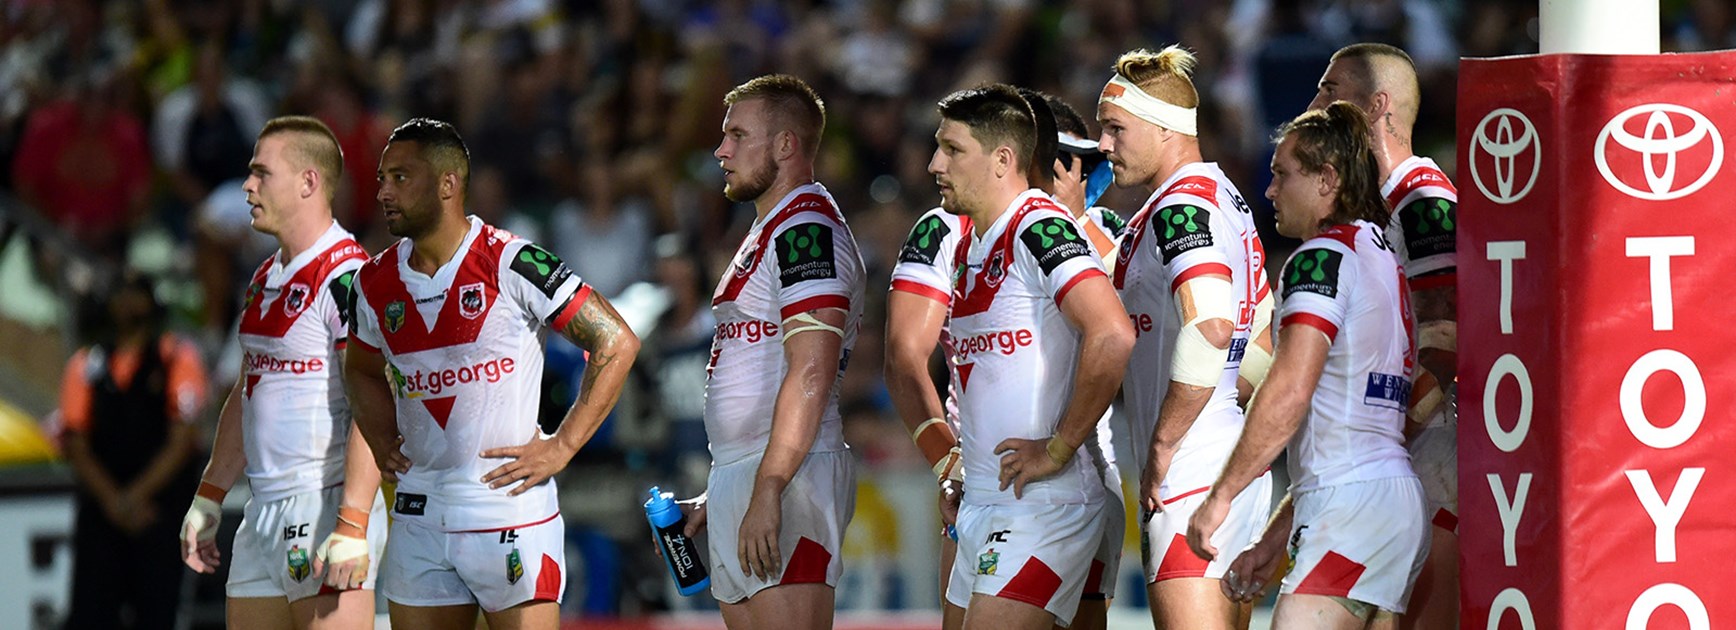 The Dragons were shut out by the Cowboys in Round 5 of the 2016 NRL Telstra Premiership.